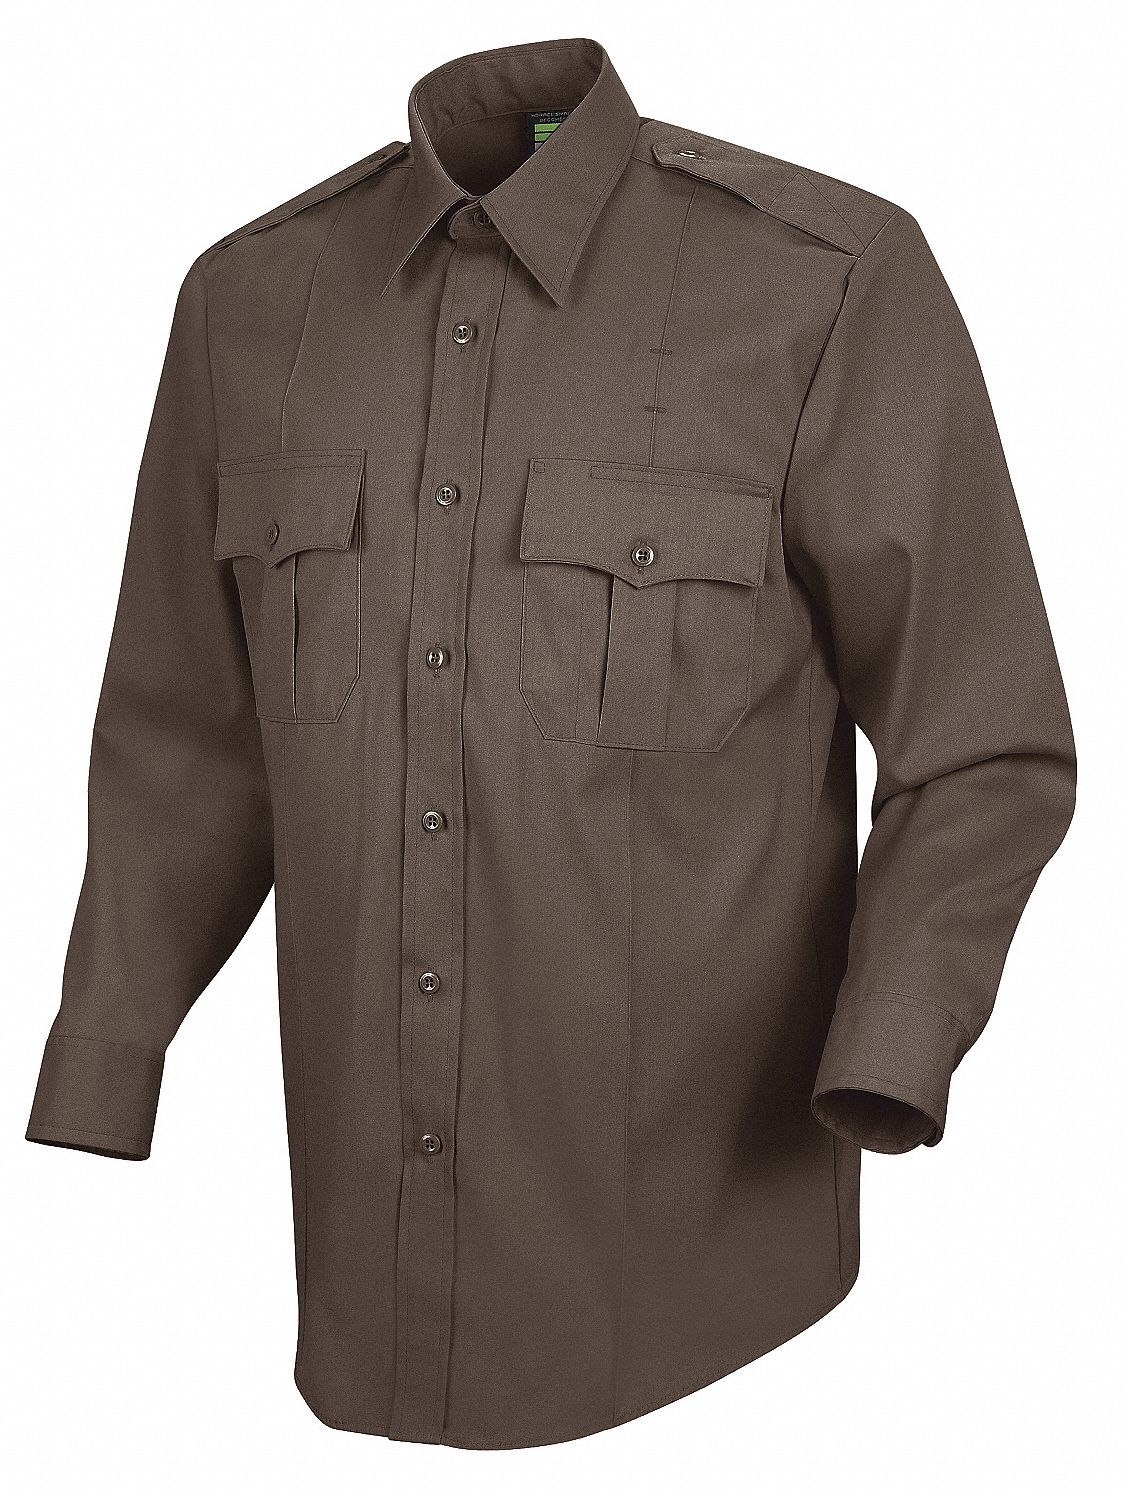 HORACE SMALL, 19 in, Brown, Sentry Plus Law Enforcement Shirt With ...